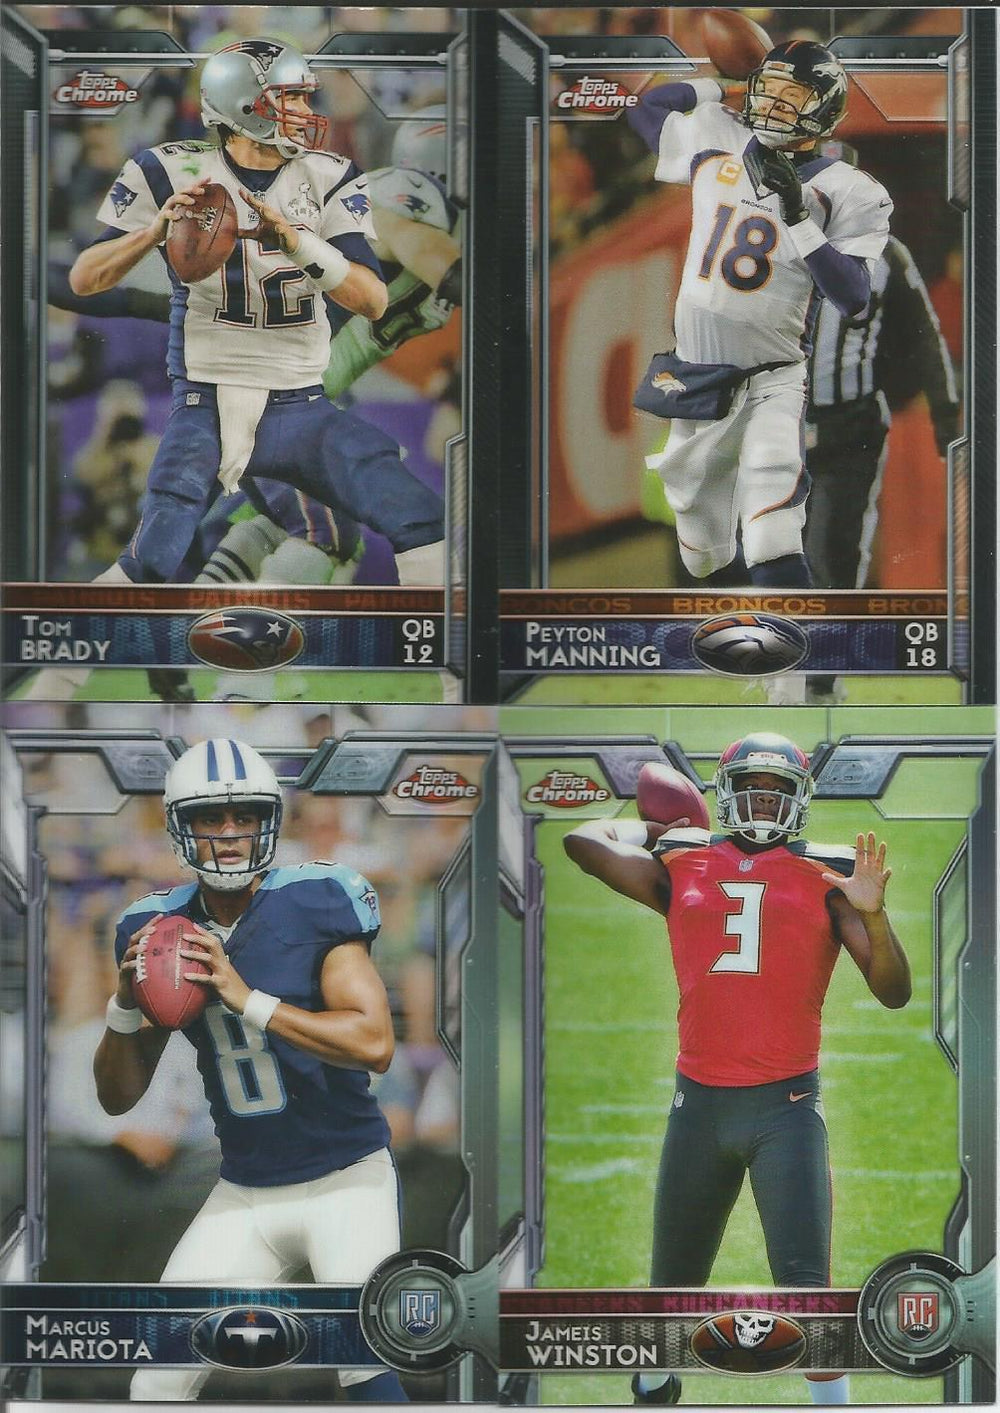 2015 Topps CHROME Football Series Complete Mint Set with Stars and Rookies Stefon Diggs, Jameis Winston and Tom Brady Plus